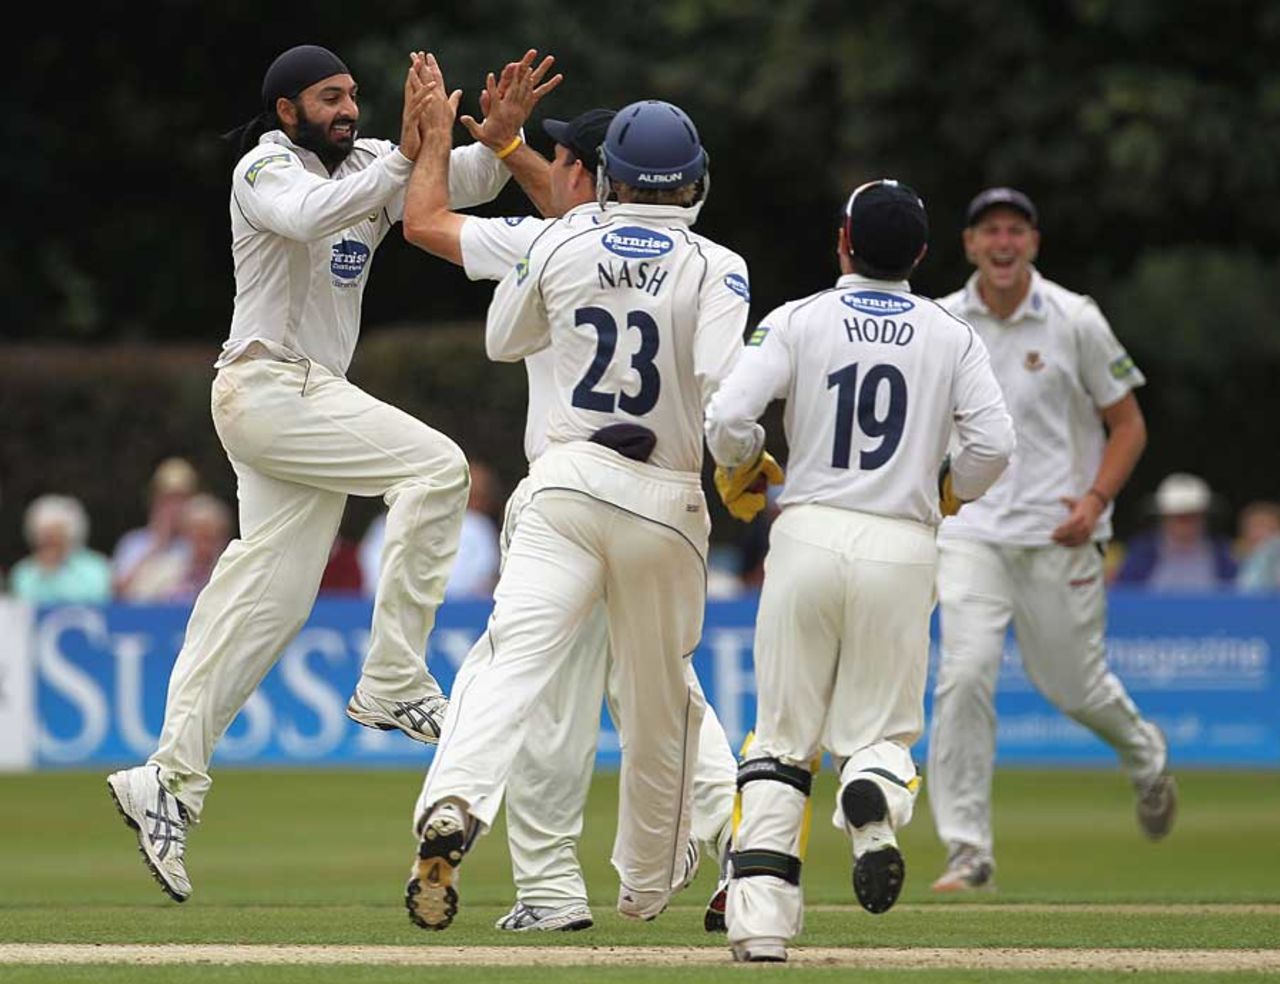 Monty Panesar's good form continued with two wickets on the opening day against Derbyshire, Sussex v Derbyshire, County Championship Division Two, Horsham, August 18 2010